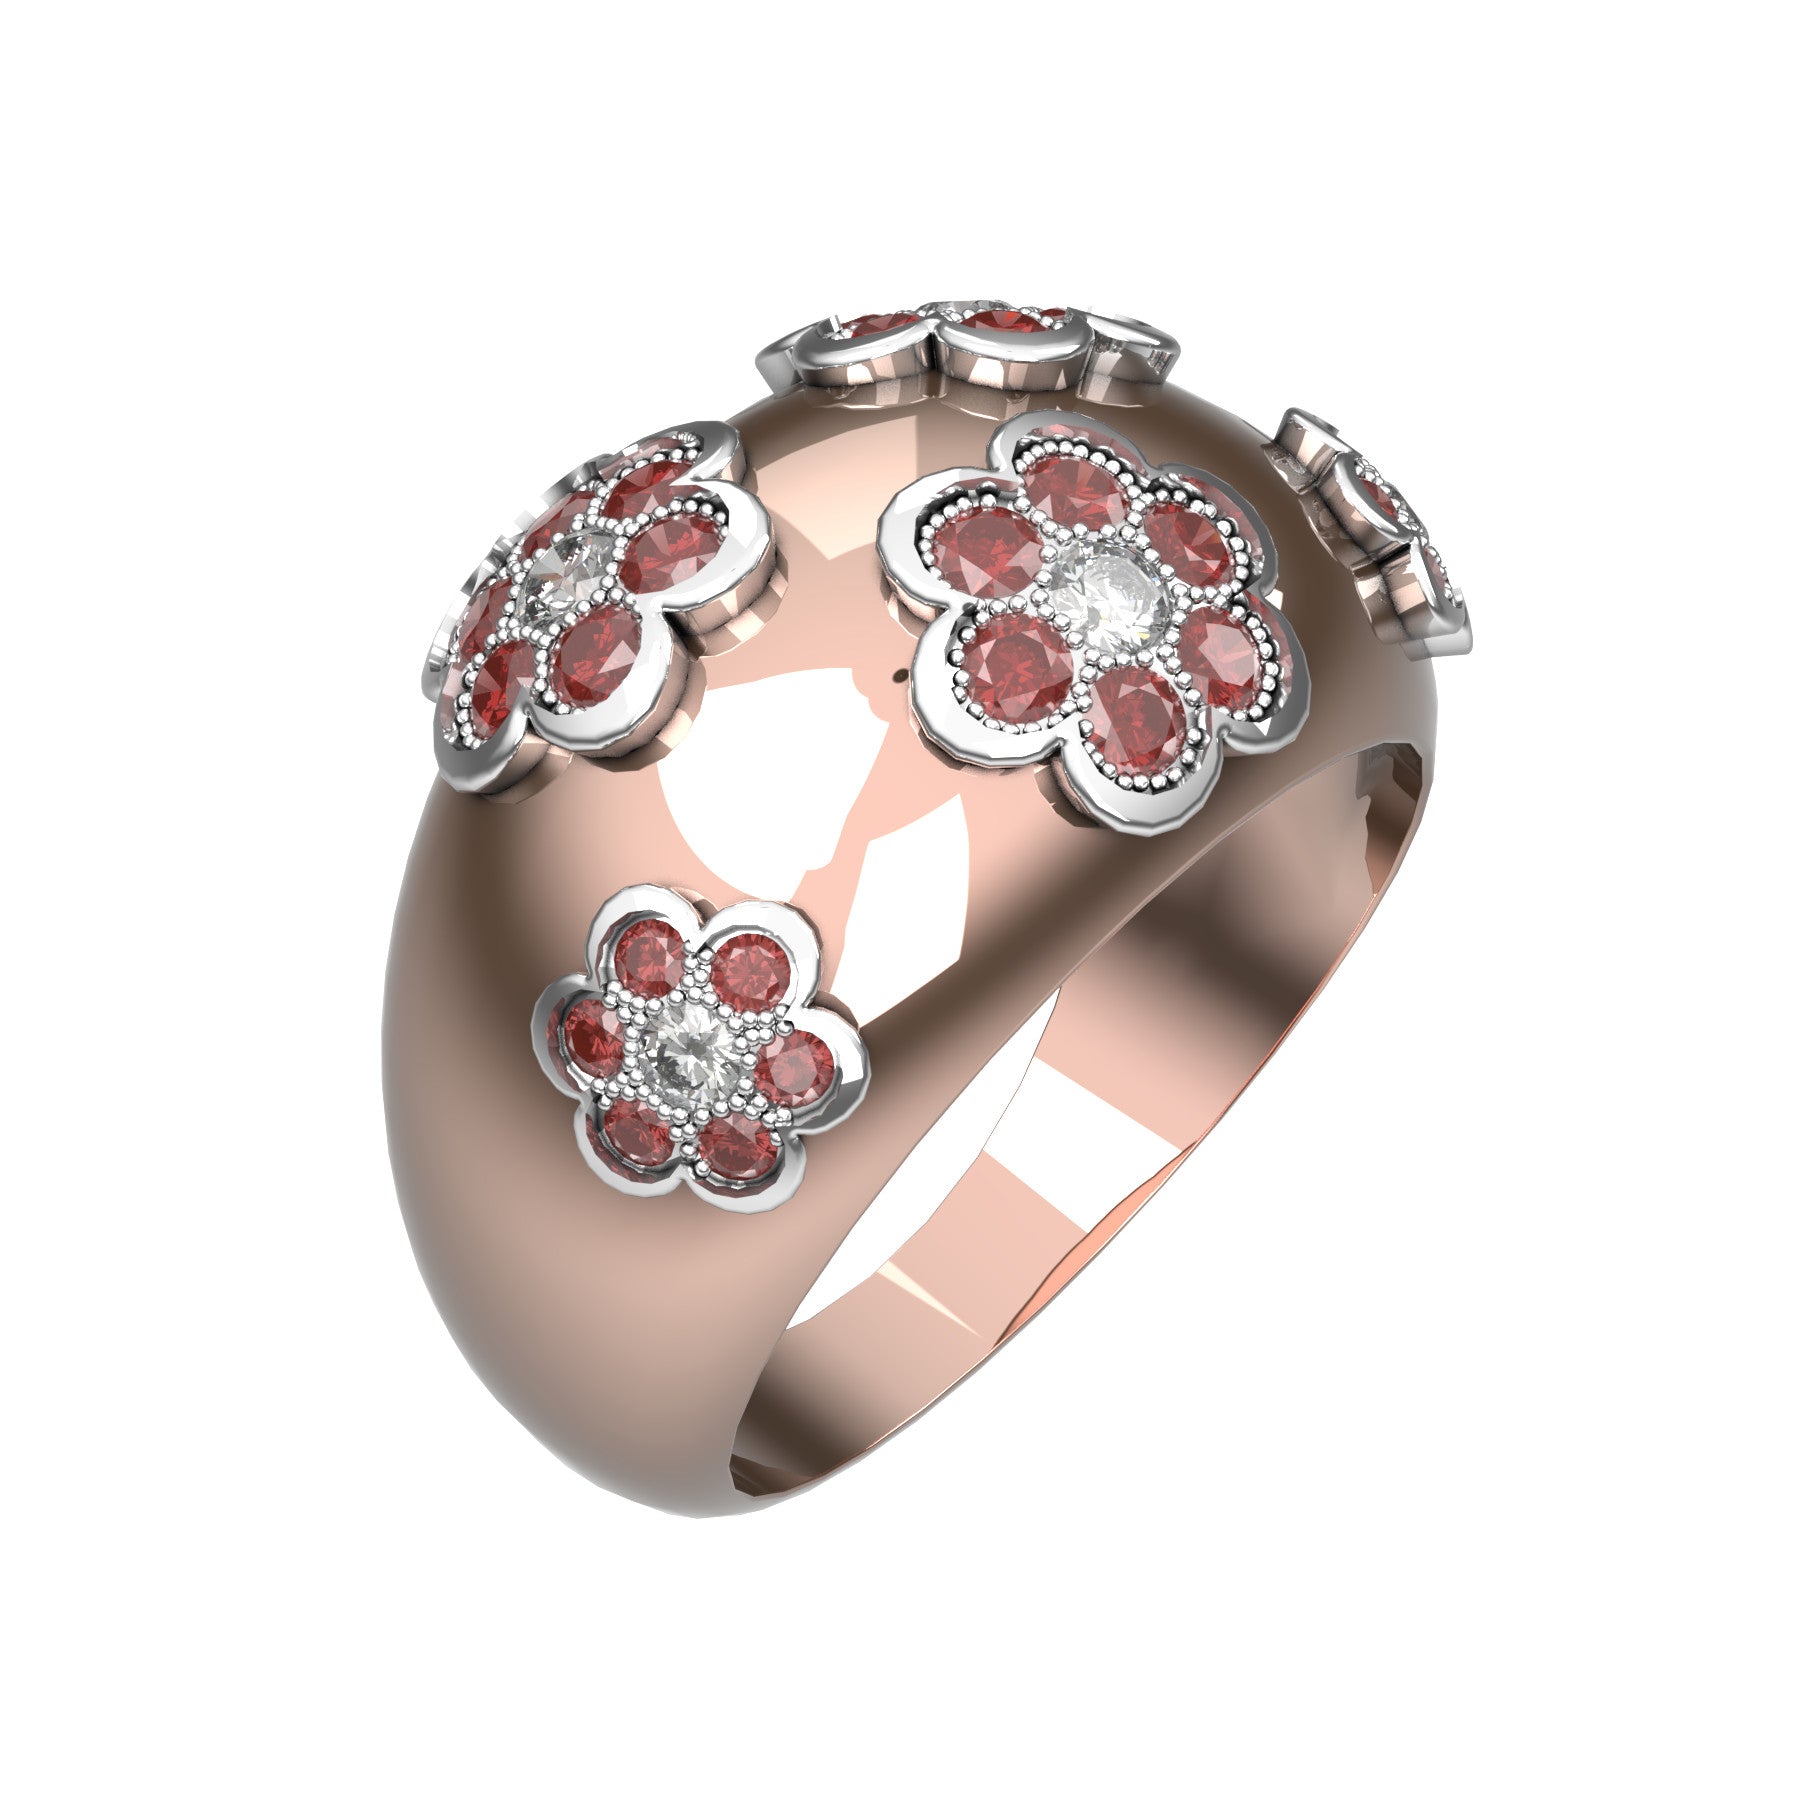 Blooming band ring, natural round diamonds, natural round rubies, 18 k pink and white gold, weight about 7,00 g (0.25 oz), width 12 mm max